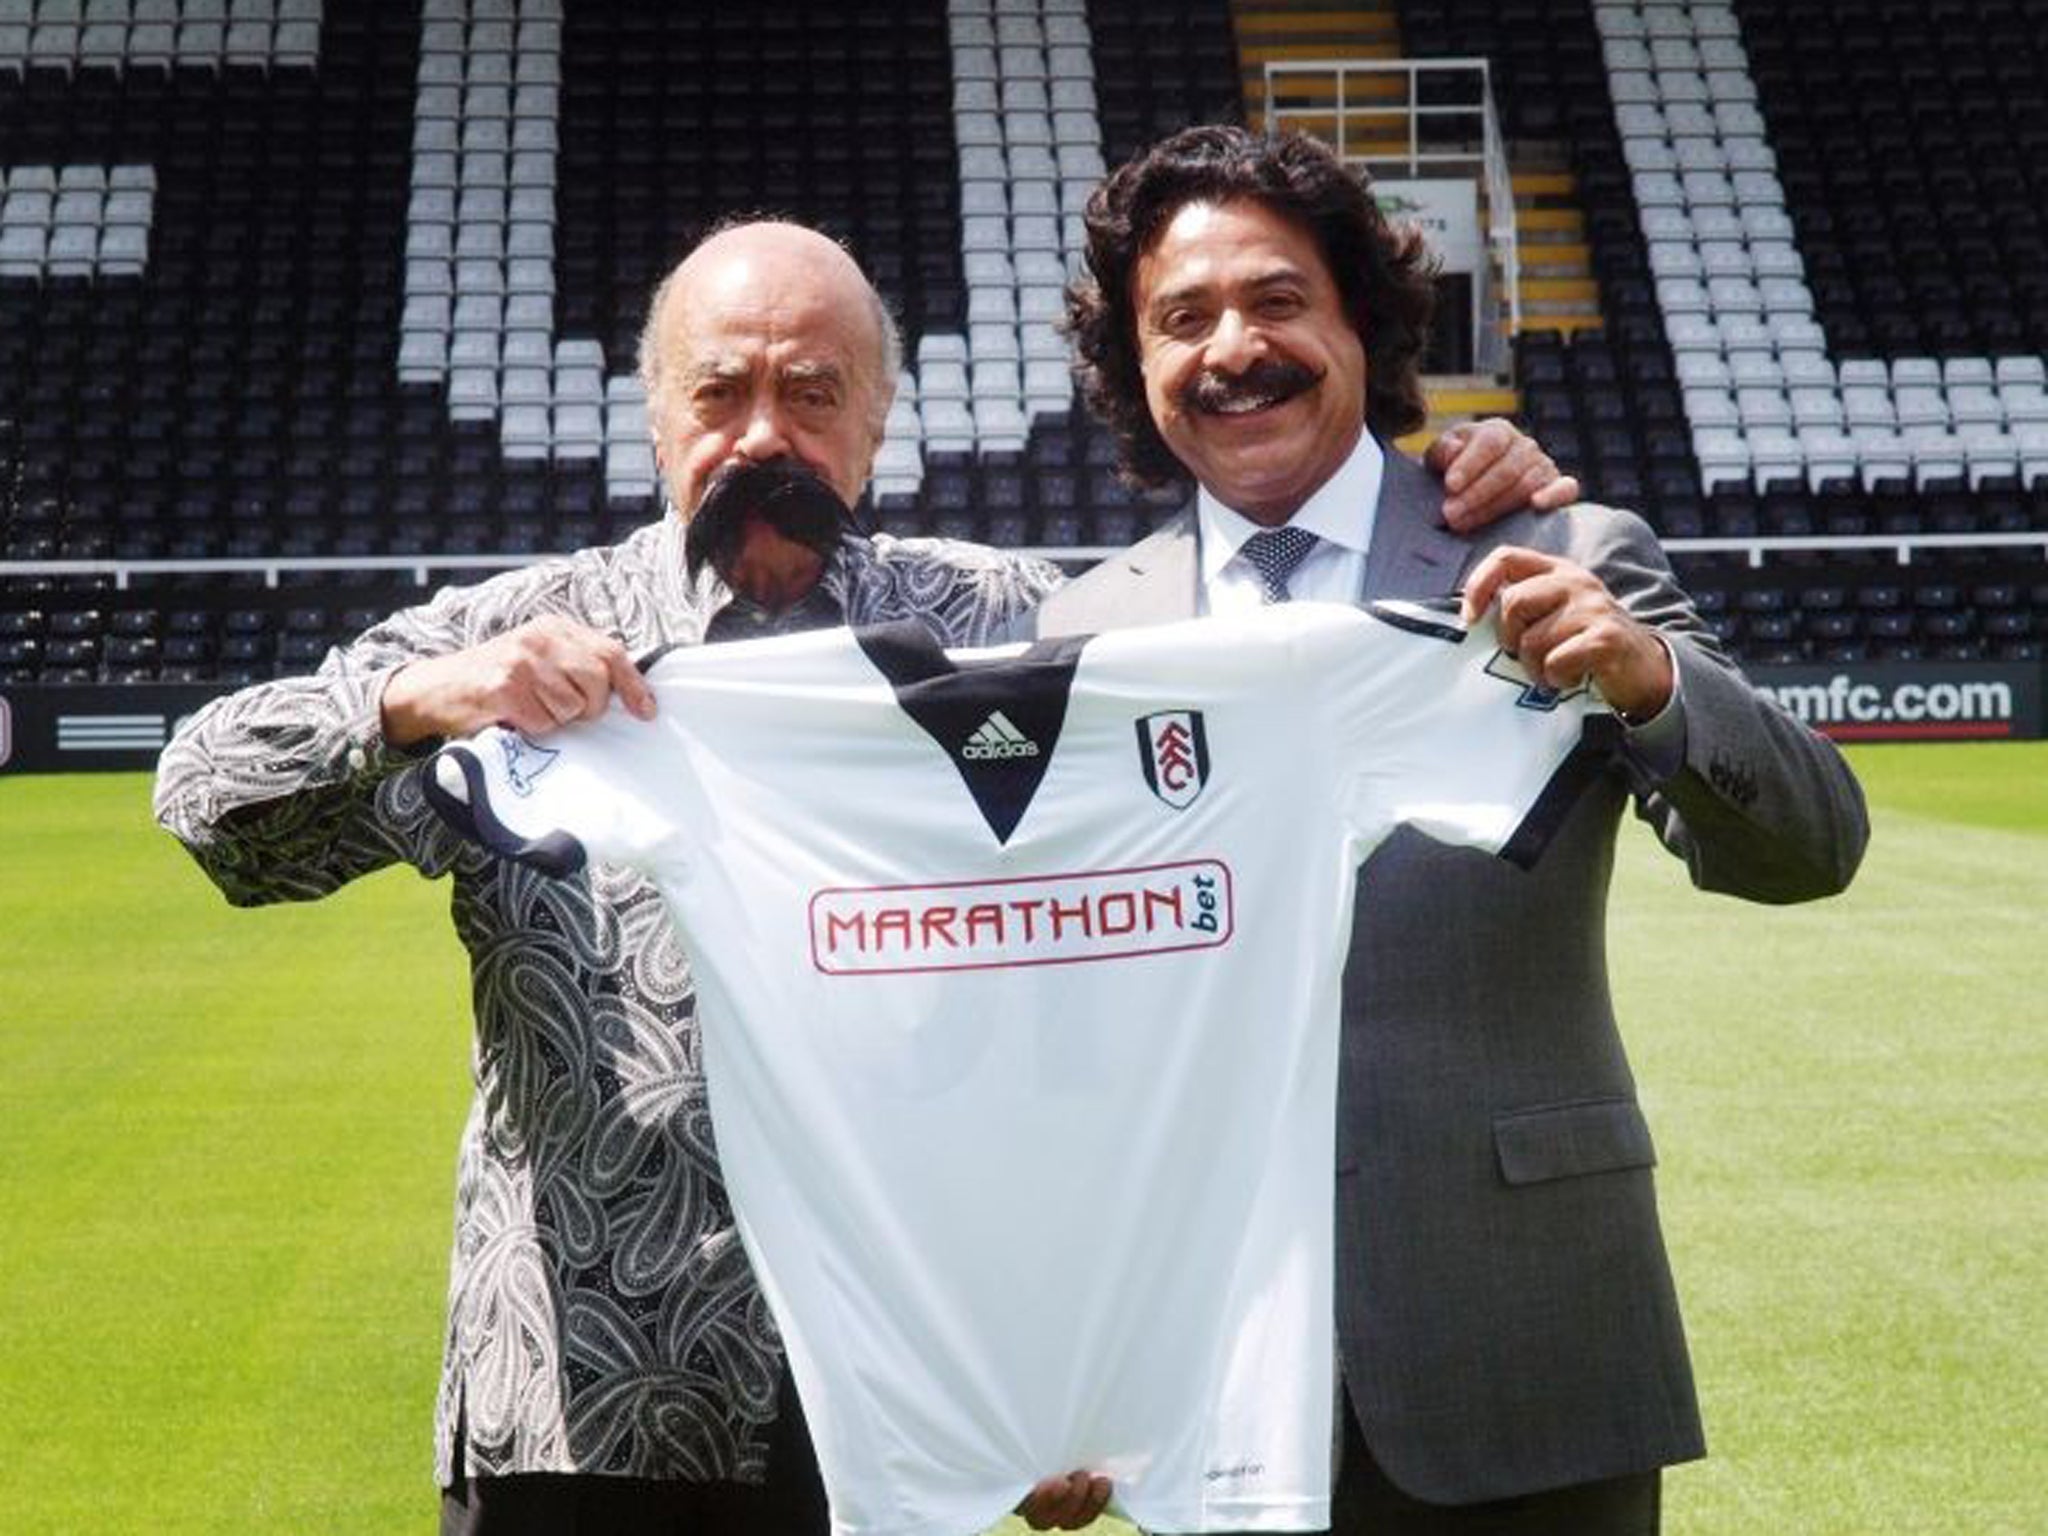 Khan bought Fulham back in 2013